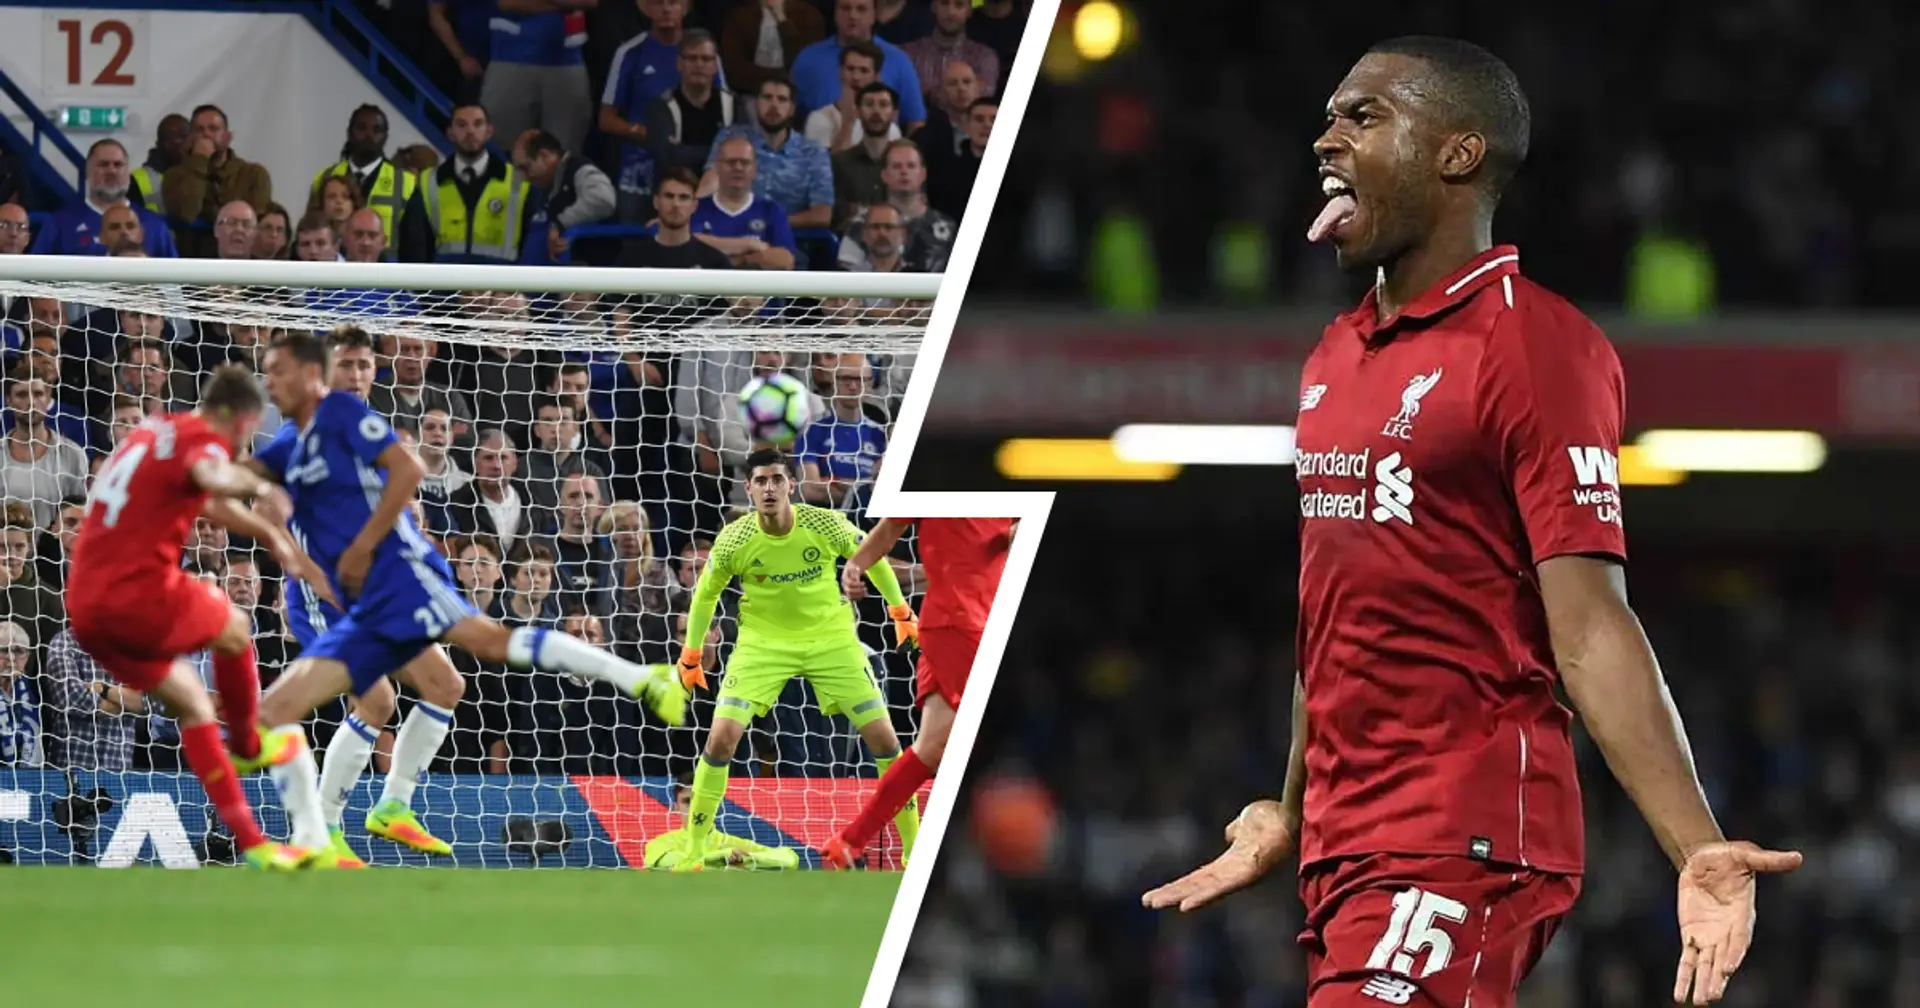 5 star moments: Watch five of LFC's best goals against Chelsea ahead of key contest (video)